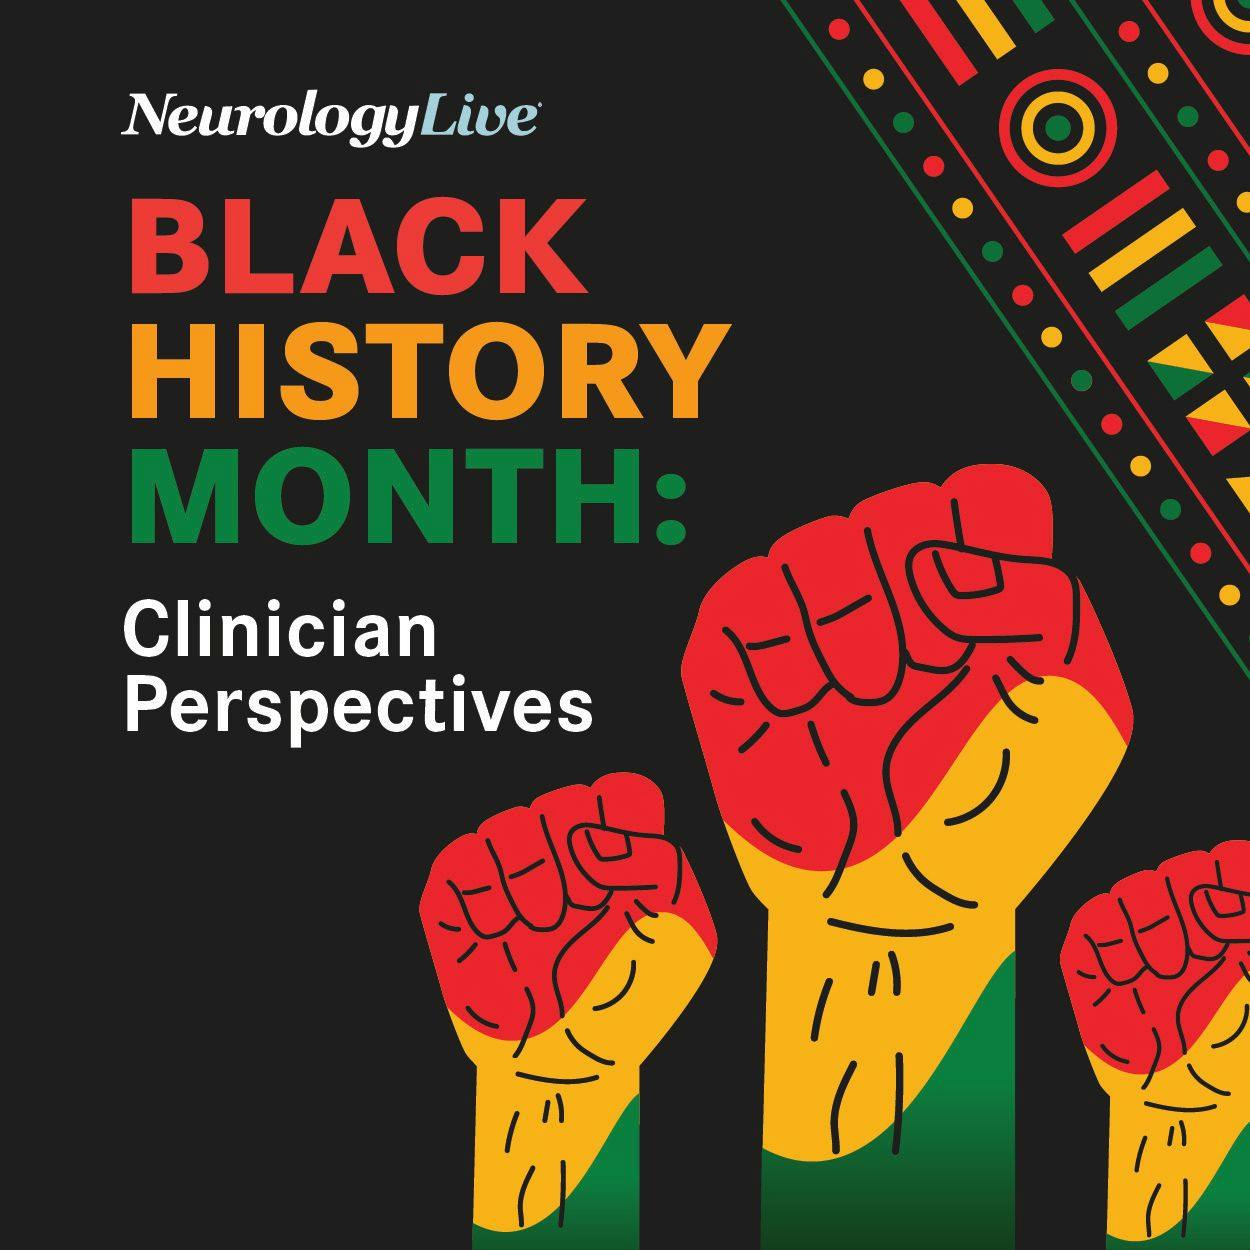 Clinician Perspectives on Black History Month: Larry Charleston IV, MD, MSc, FAHS